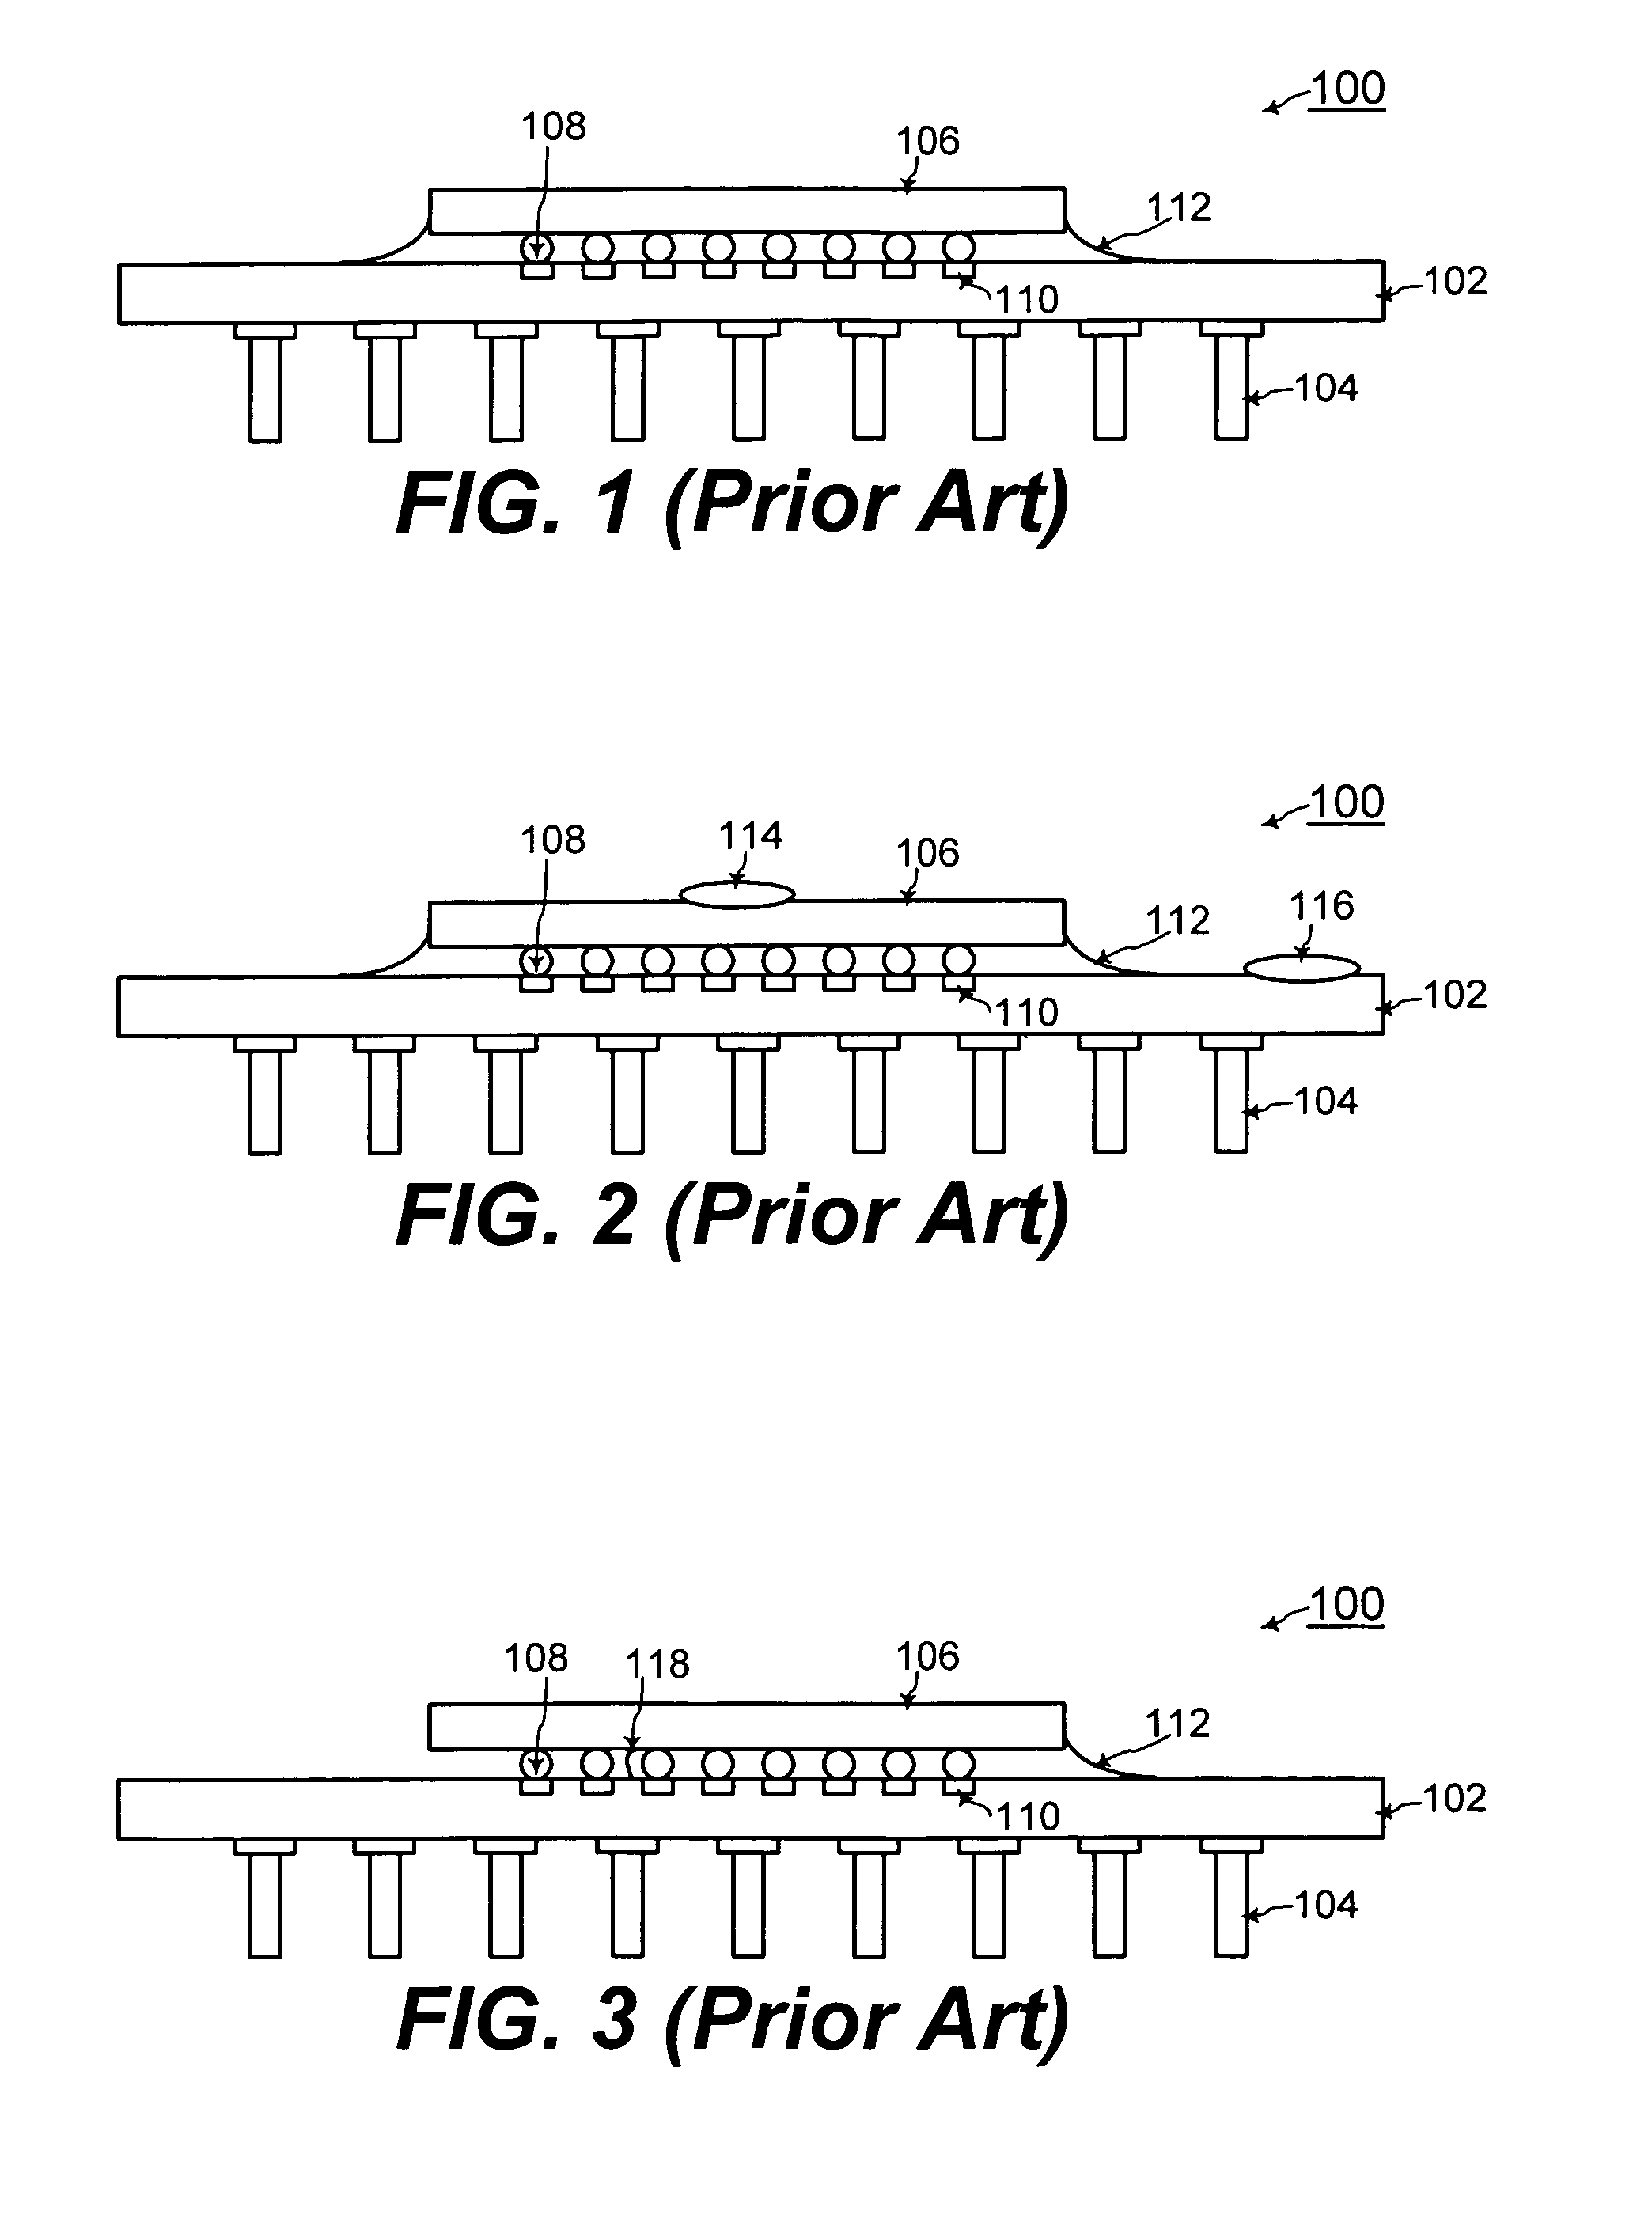 Inspection of underfill in integrated circuit package